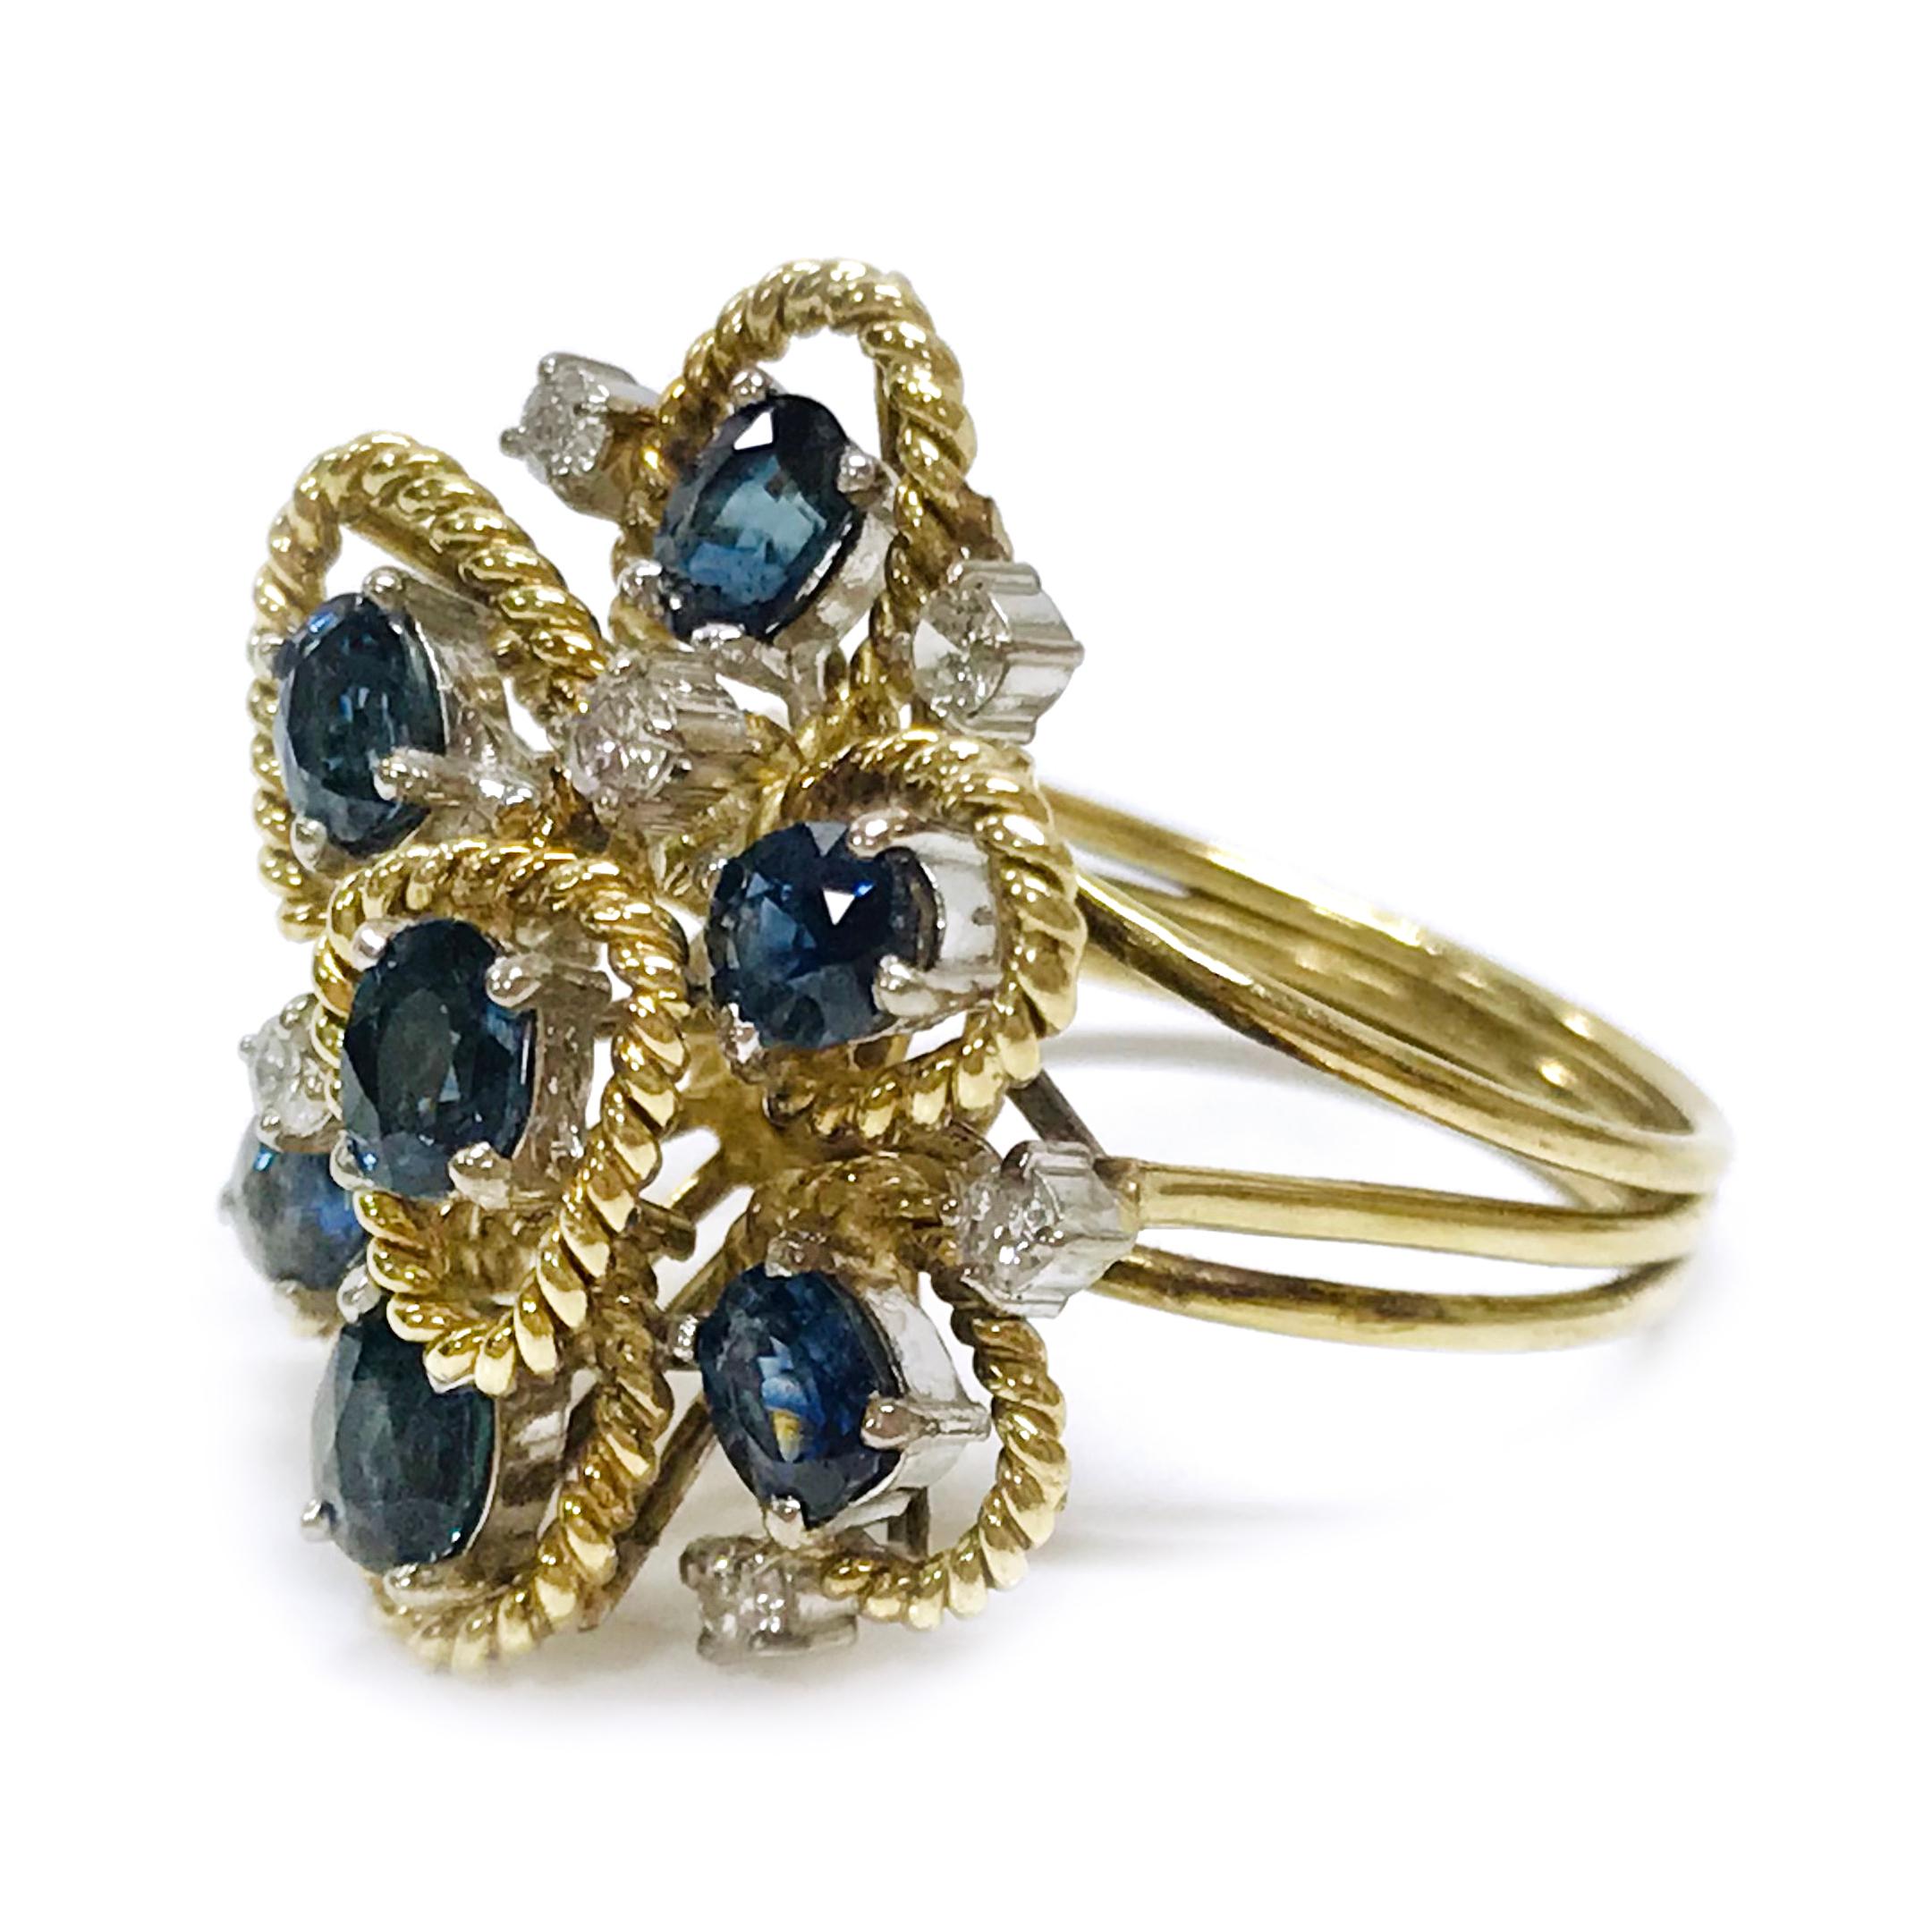 14 Karat two-tone Blue Sapphire Diamond Rope Ring. The ring features an elevated gallery of multiple tiers with medium blue oval 4.5 x3.4mm sapphires and round diamonds. All stones are prong-set in white gold and every sapphire has an outline of